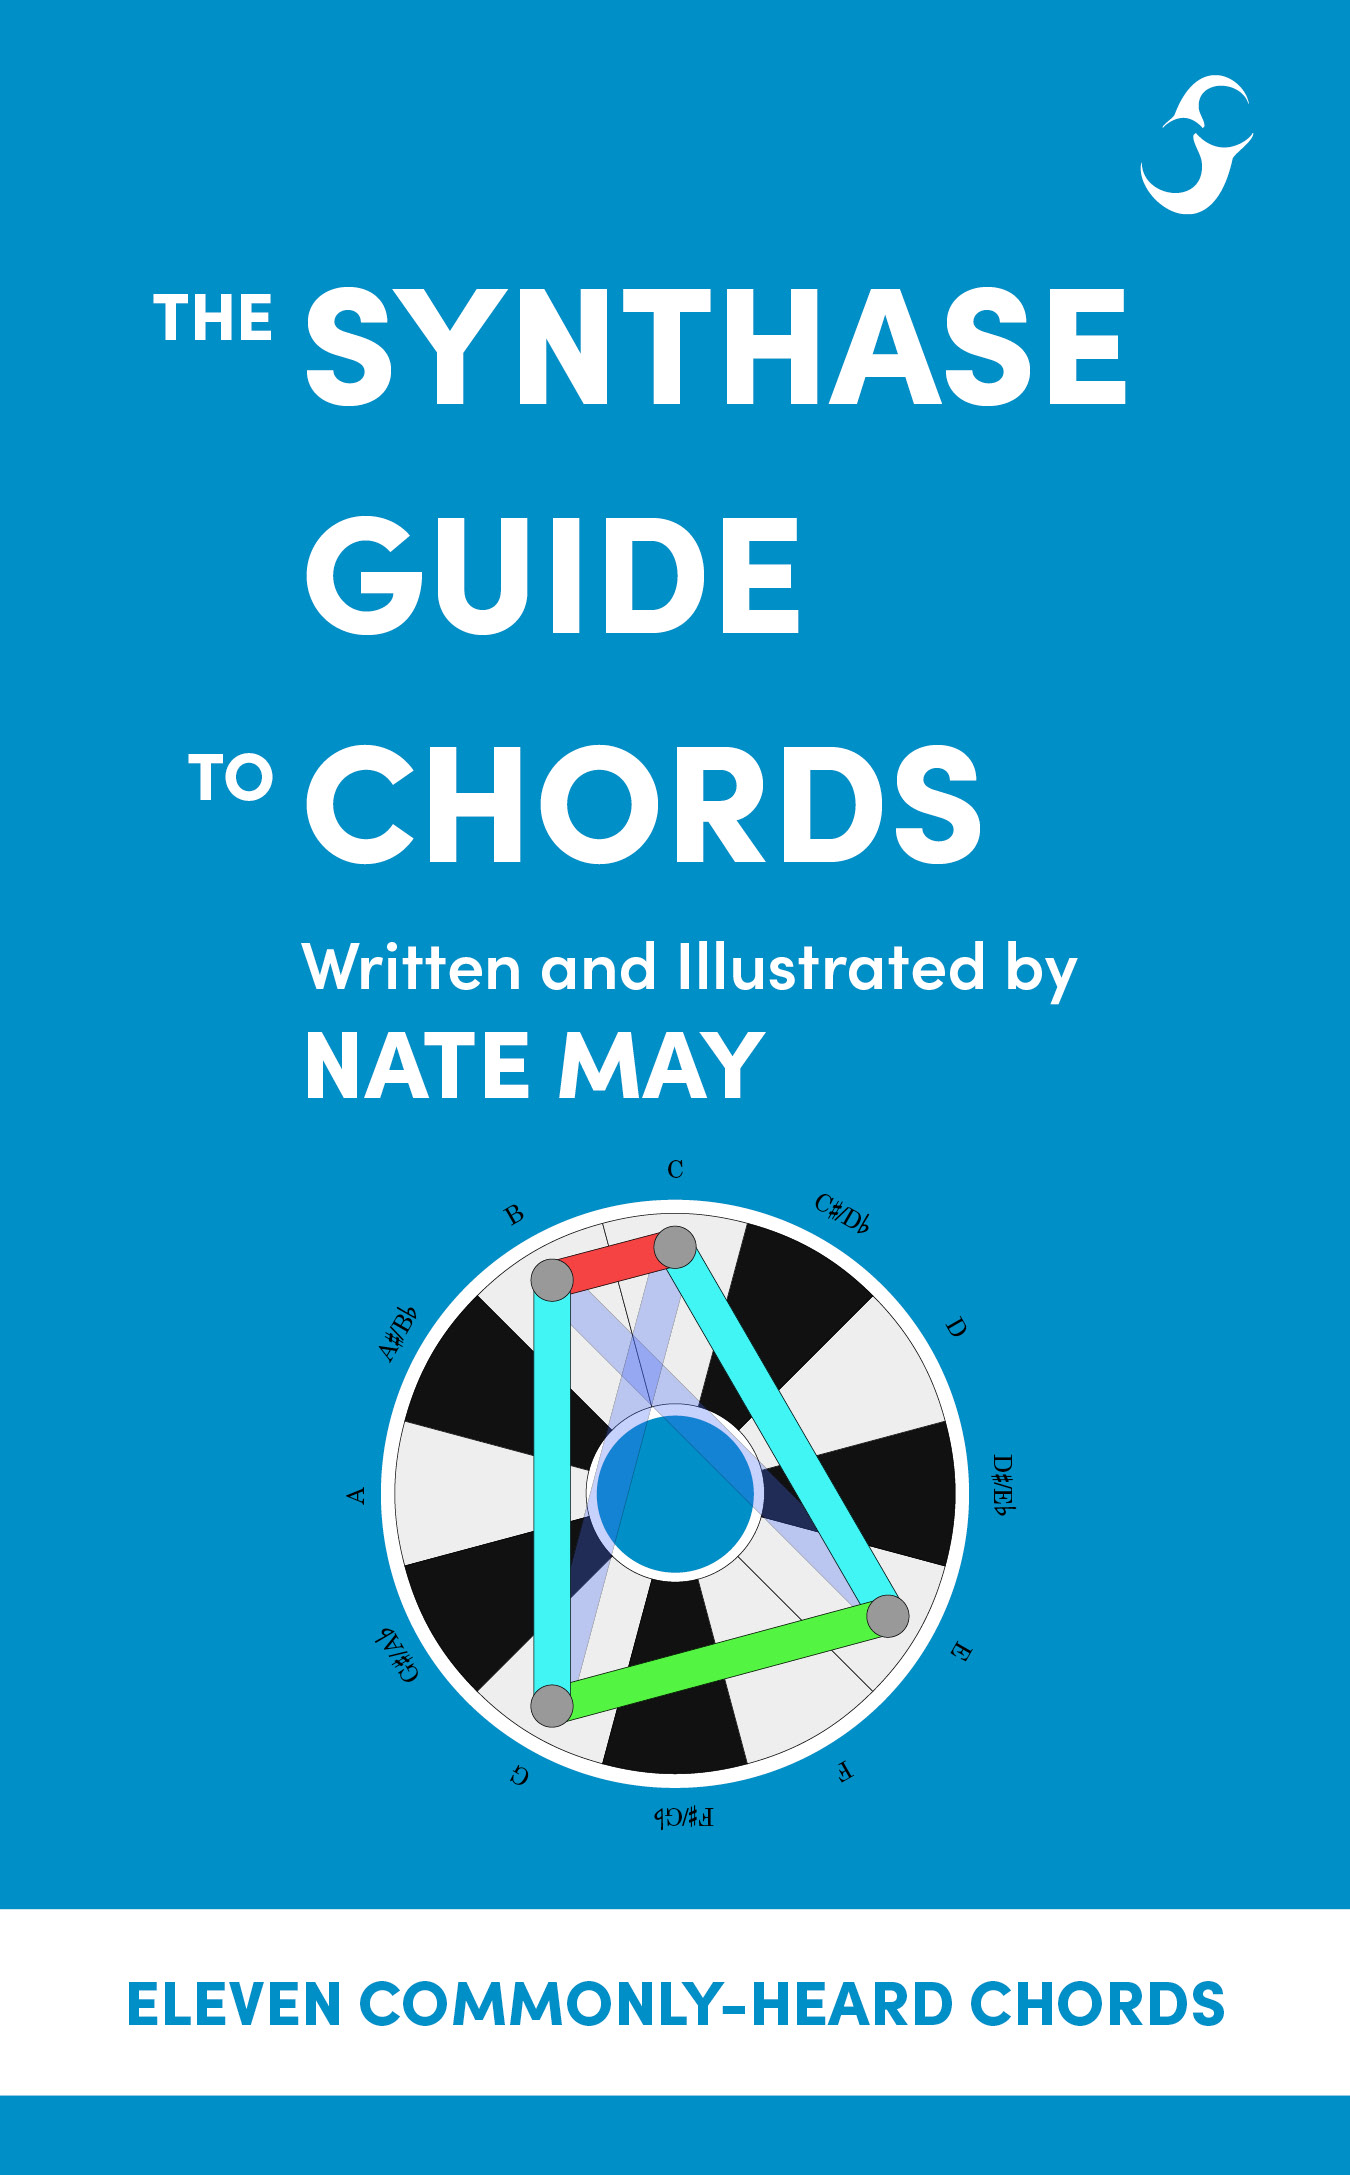 FREE: The Synthase Guide to Chords by Nate May